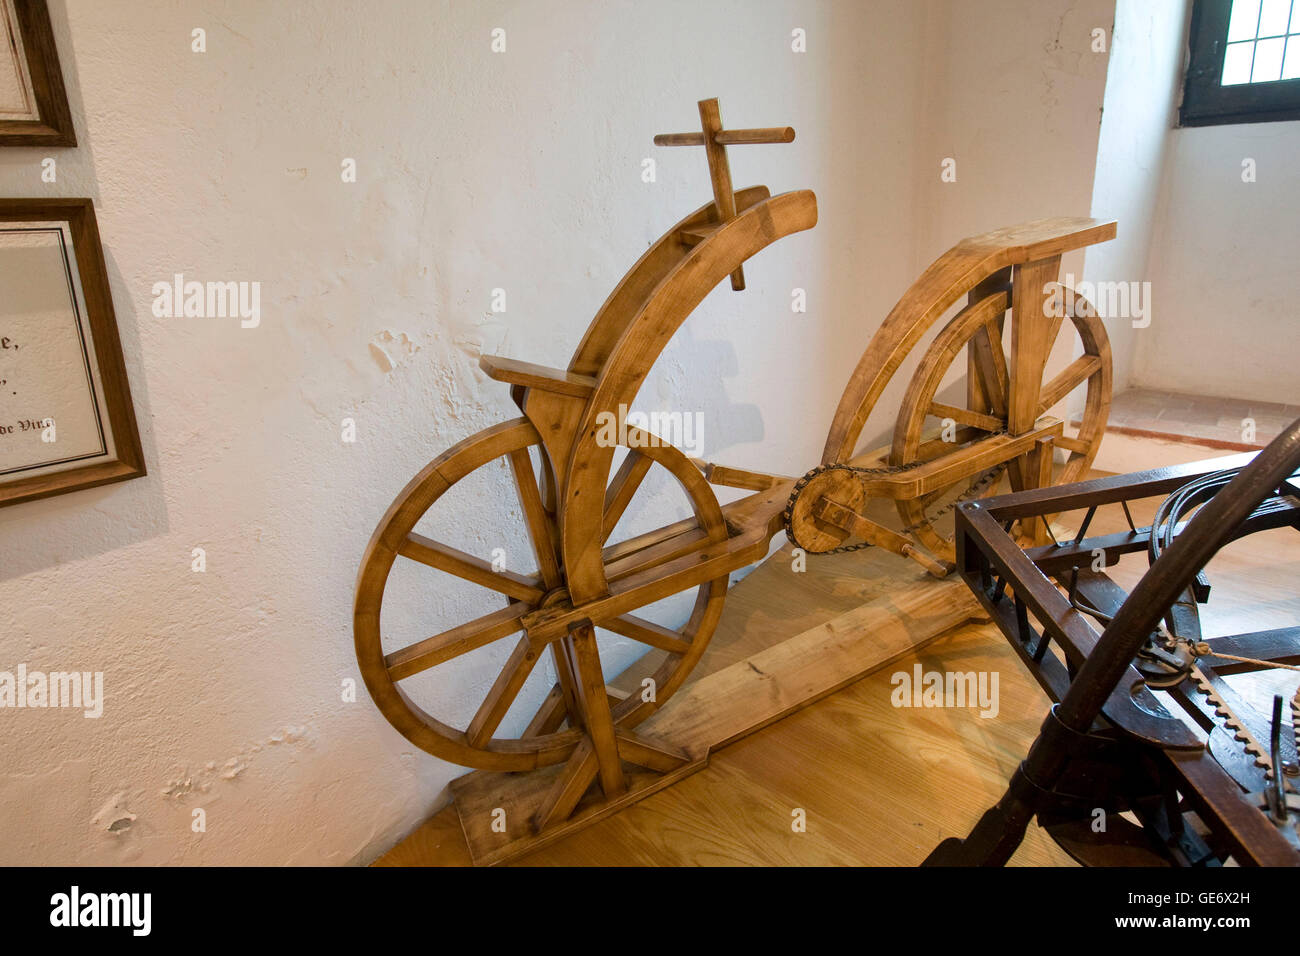 Wooden bicycle designed by Leonardo da Vinci displayed at the Clos Luce mansion, the inventor's last home, in Amboise, France. Stock Photo